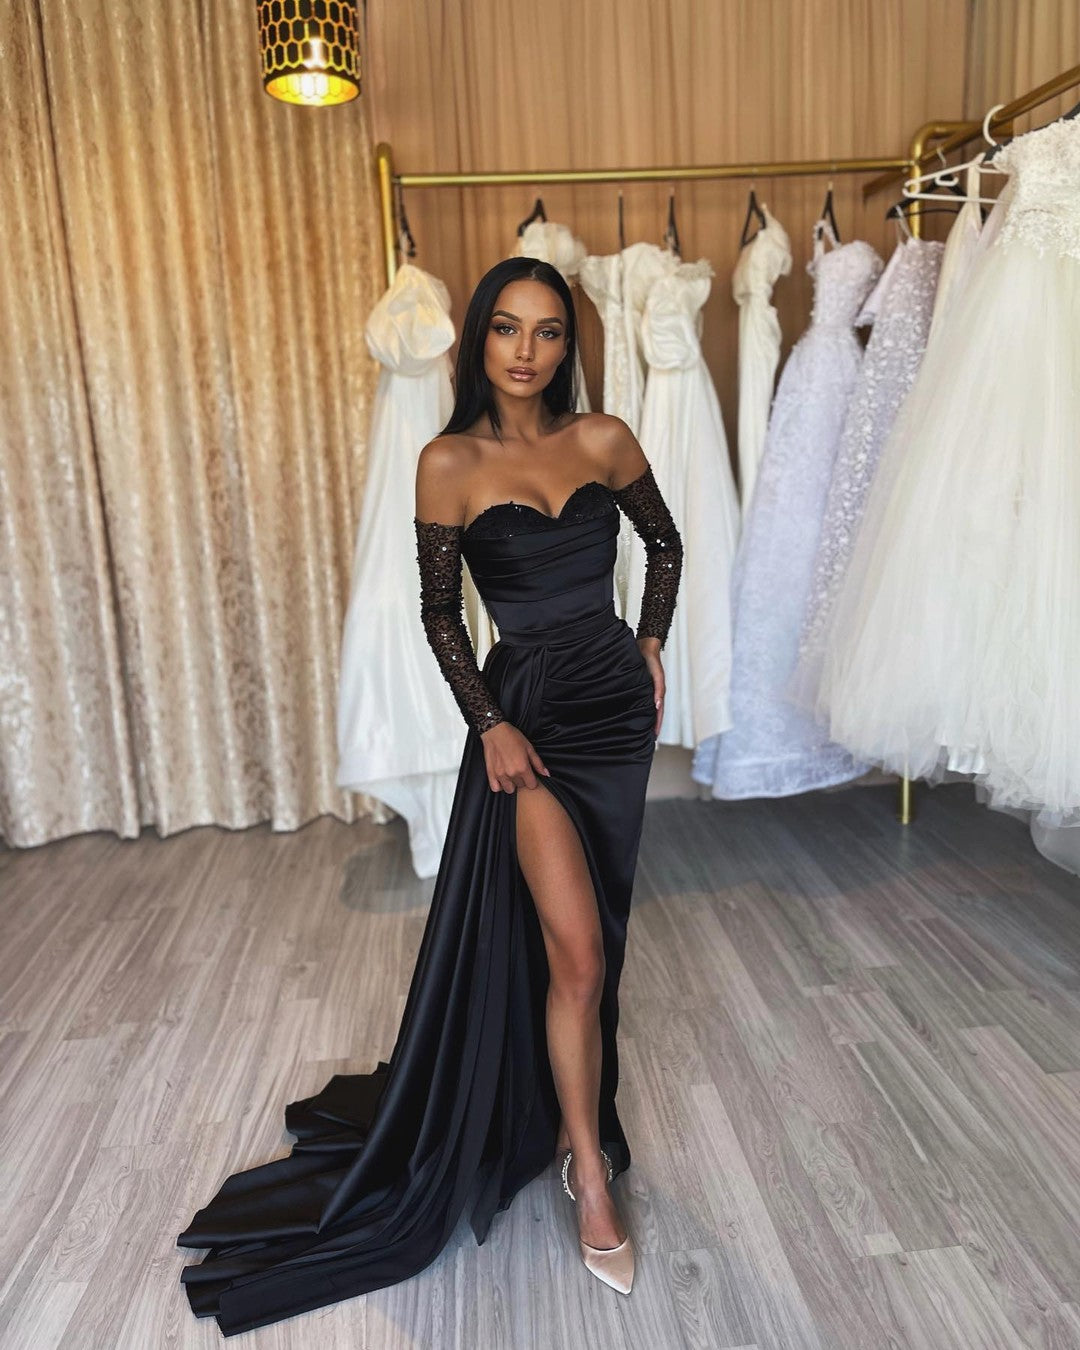 black formal gown